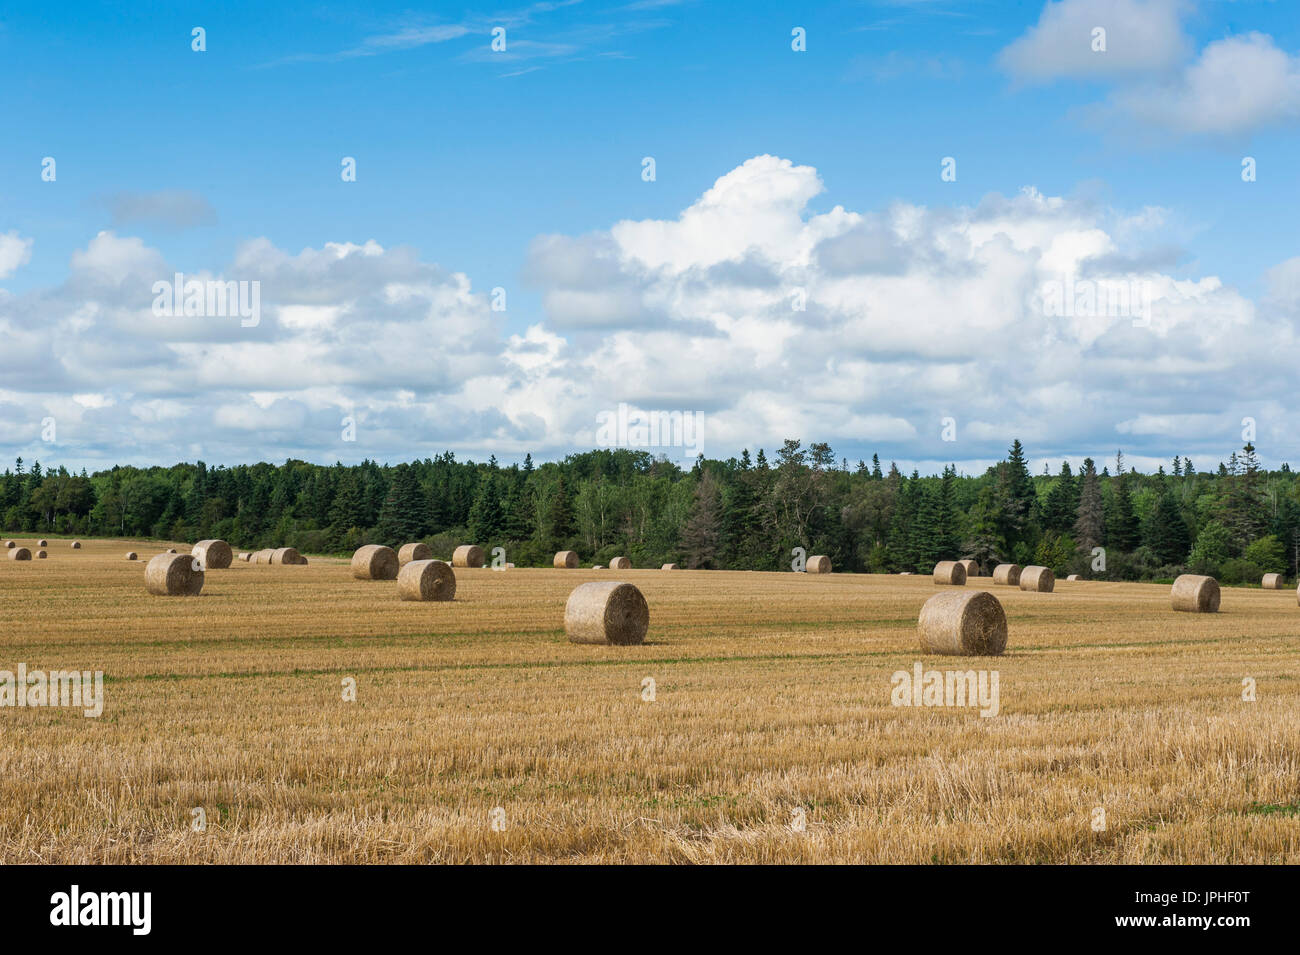 Harvested wheat field with bales of straw, Prince Edward island, Canada Stock Photo